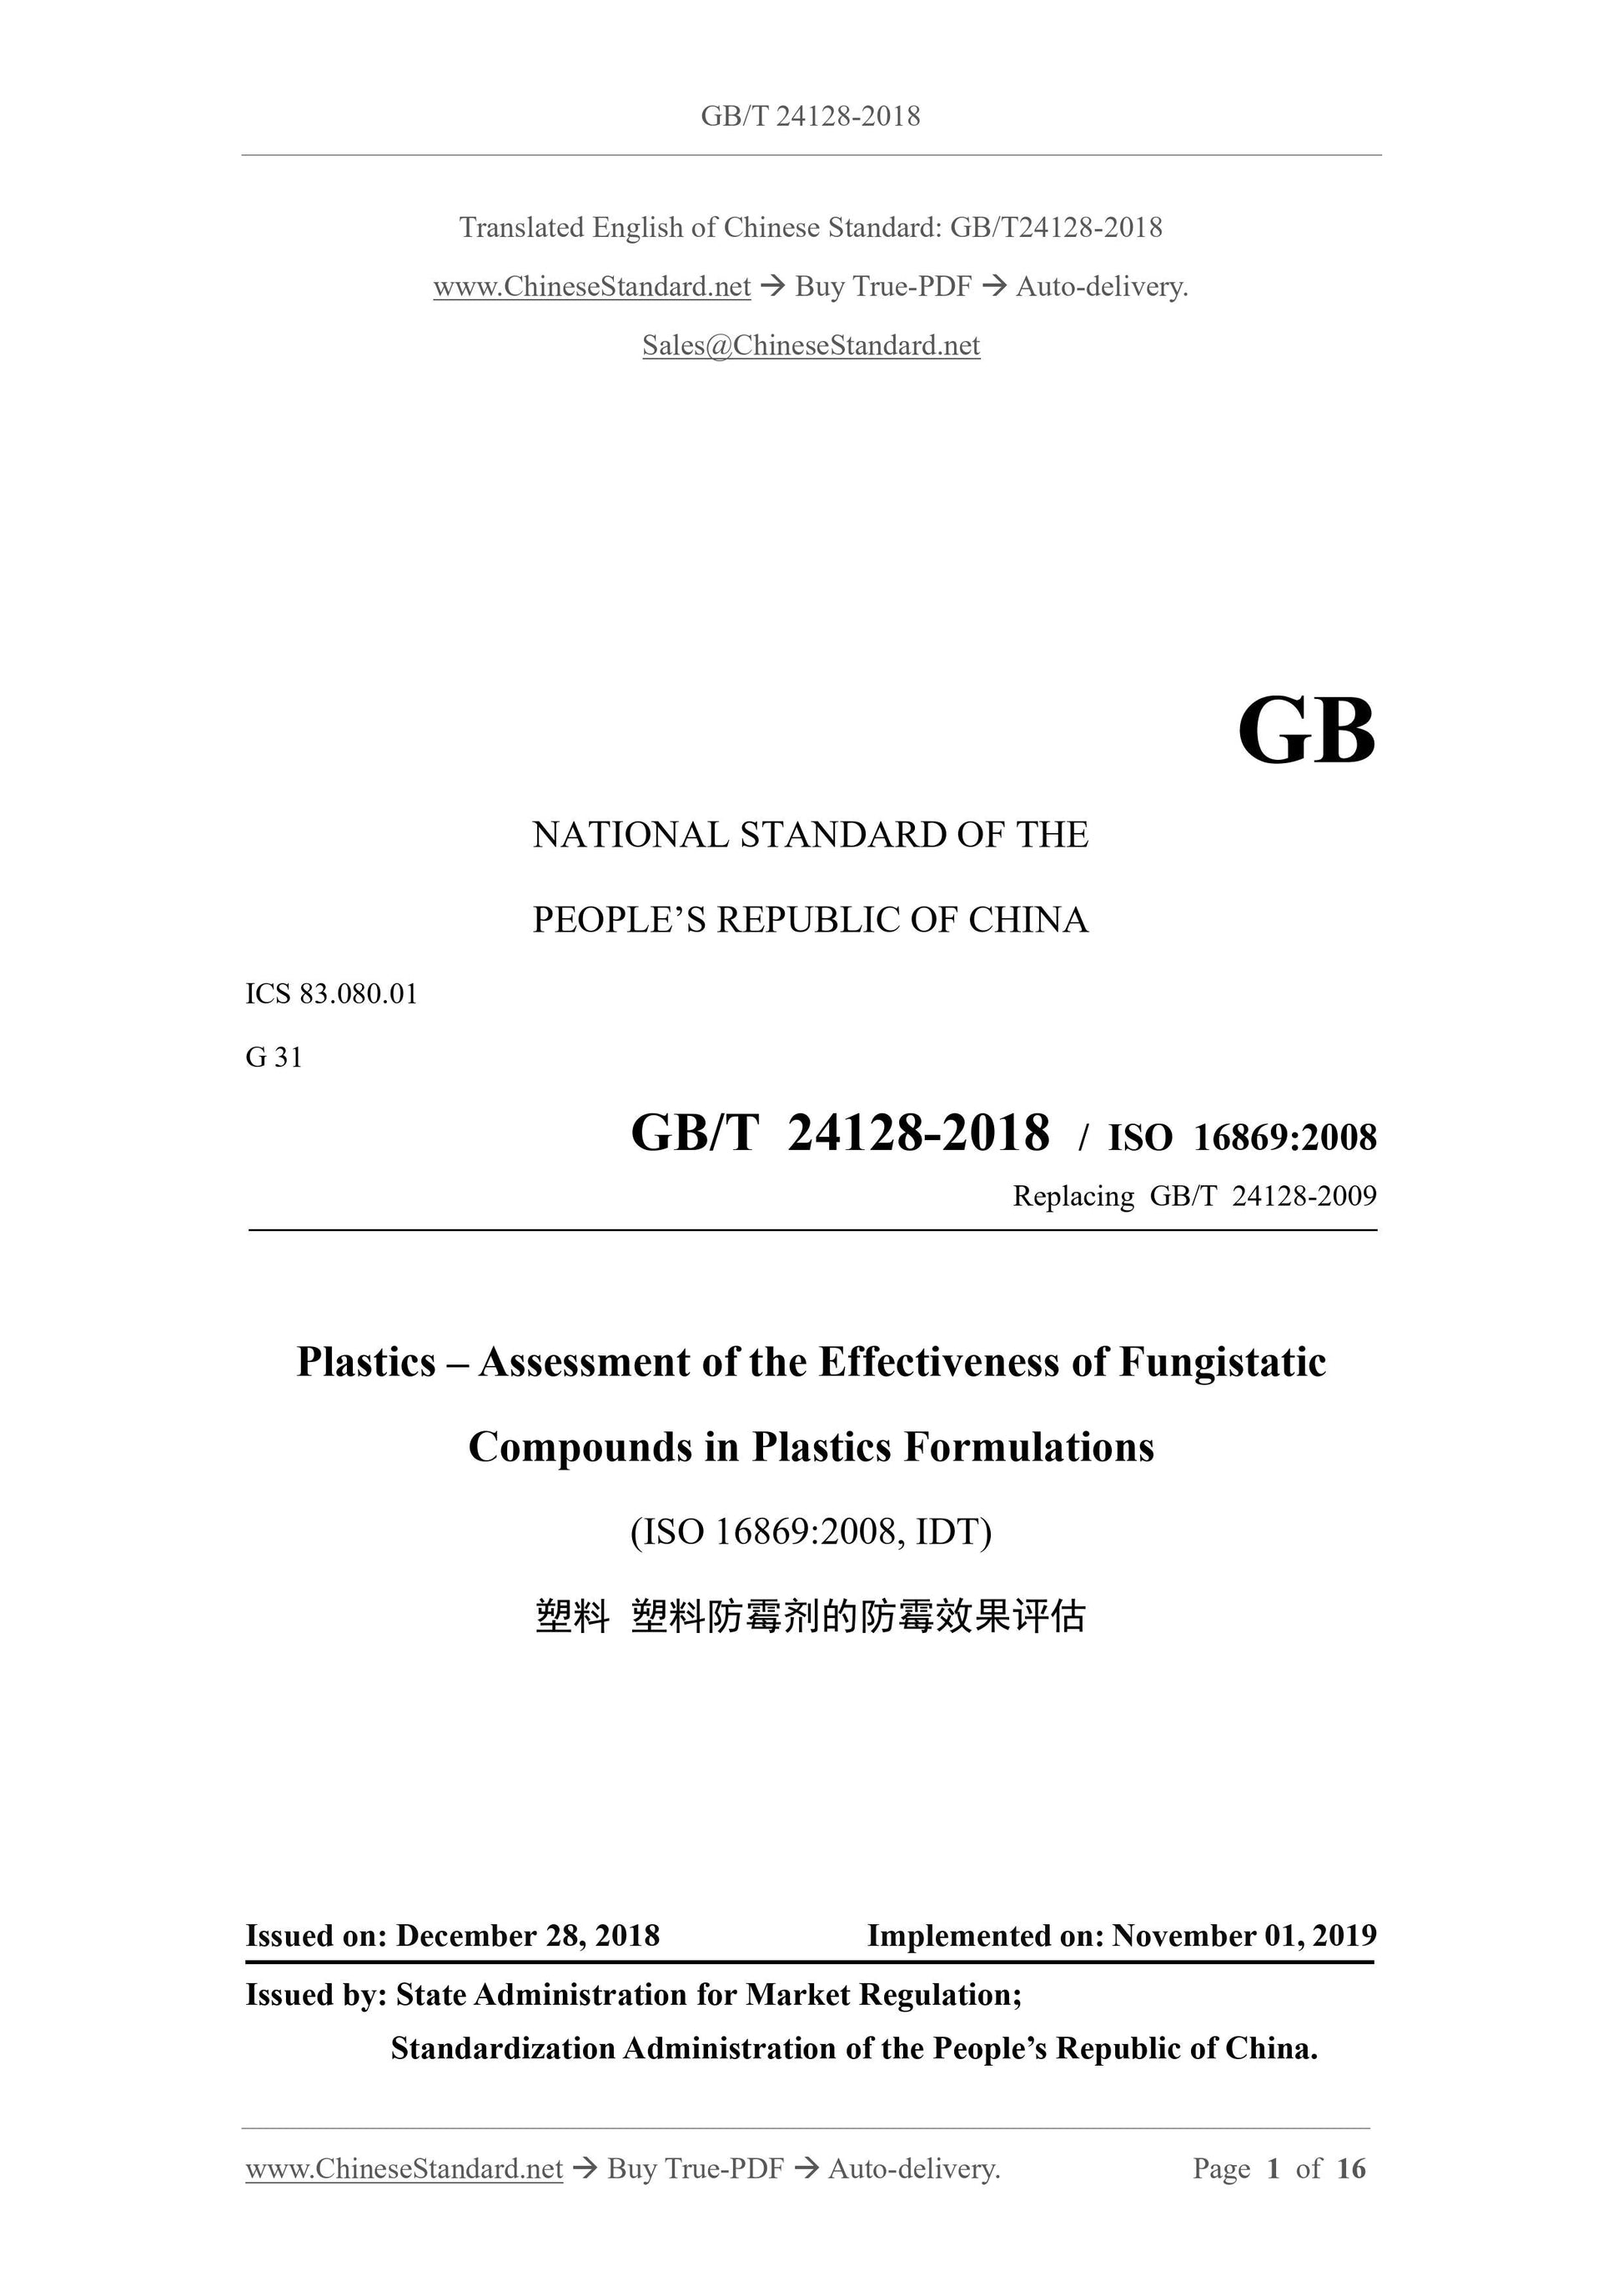 GB/T 24128-2018 Page 1